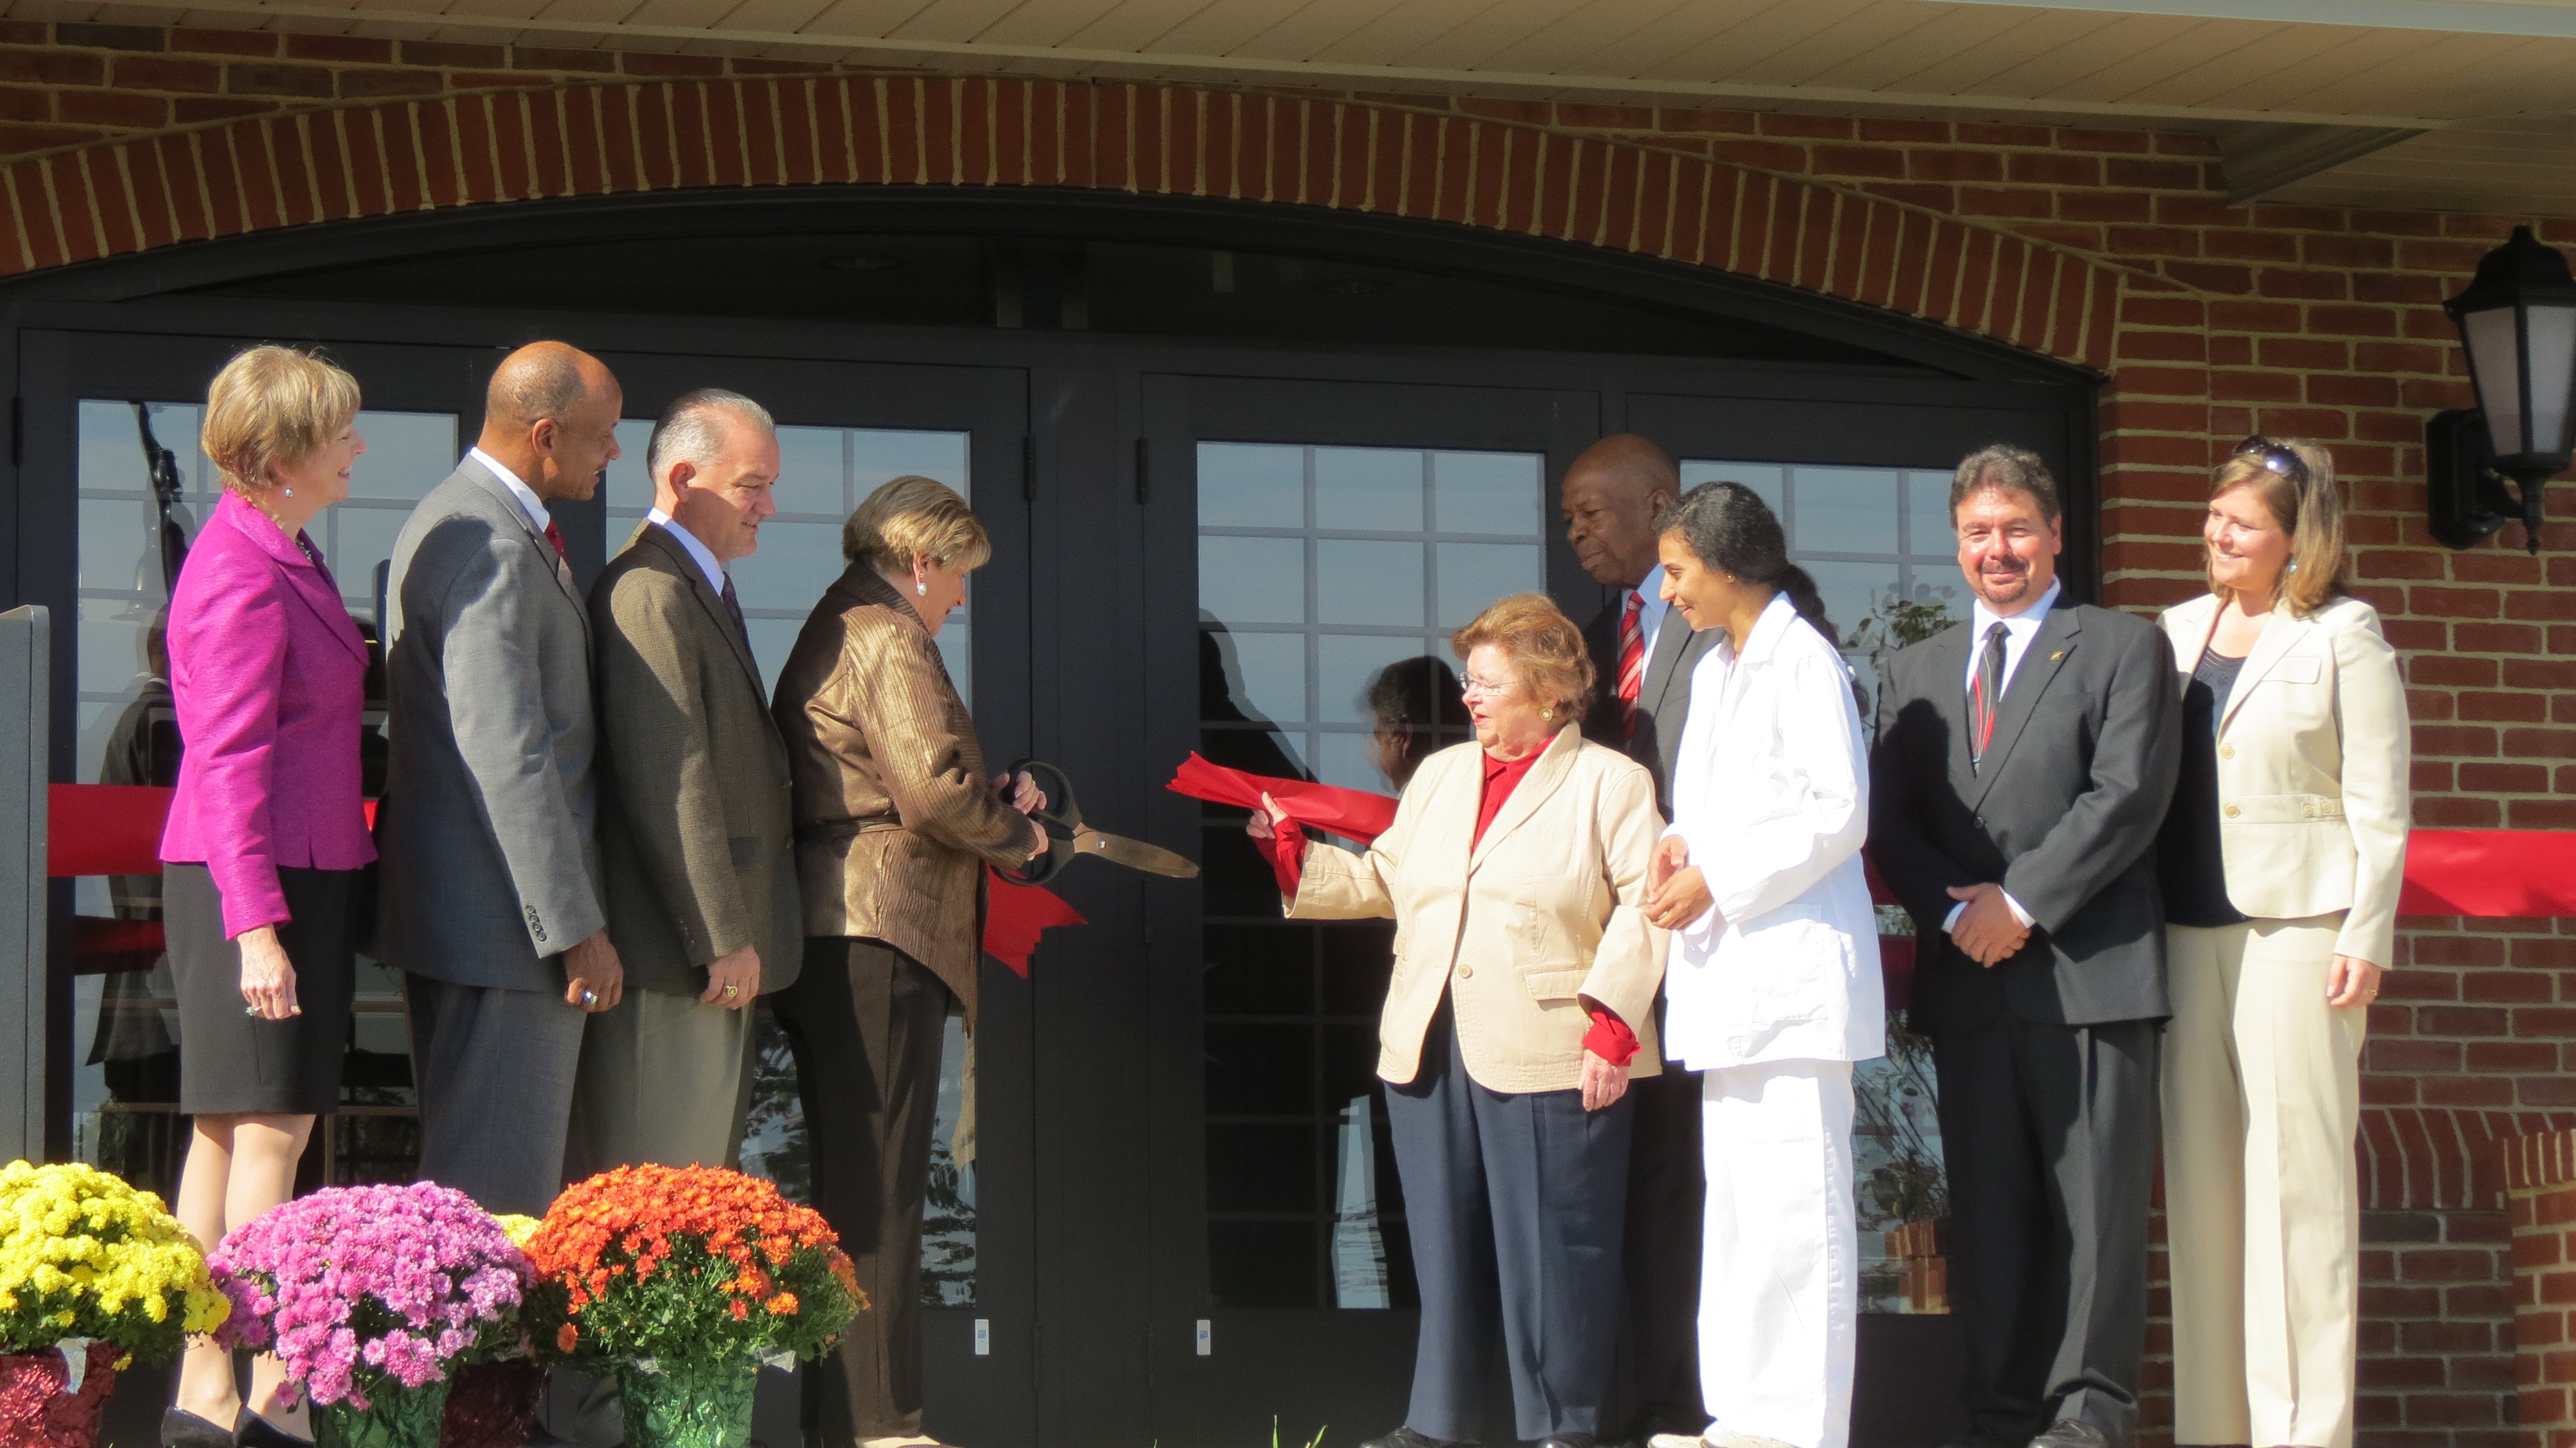 Mikulski unveils new allied healthcare education center in Mount Airy, MD.